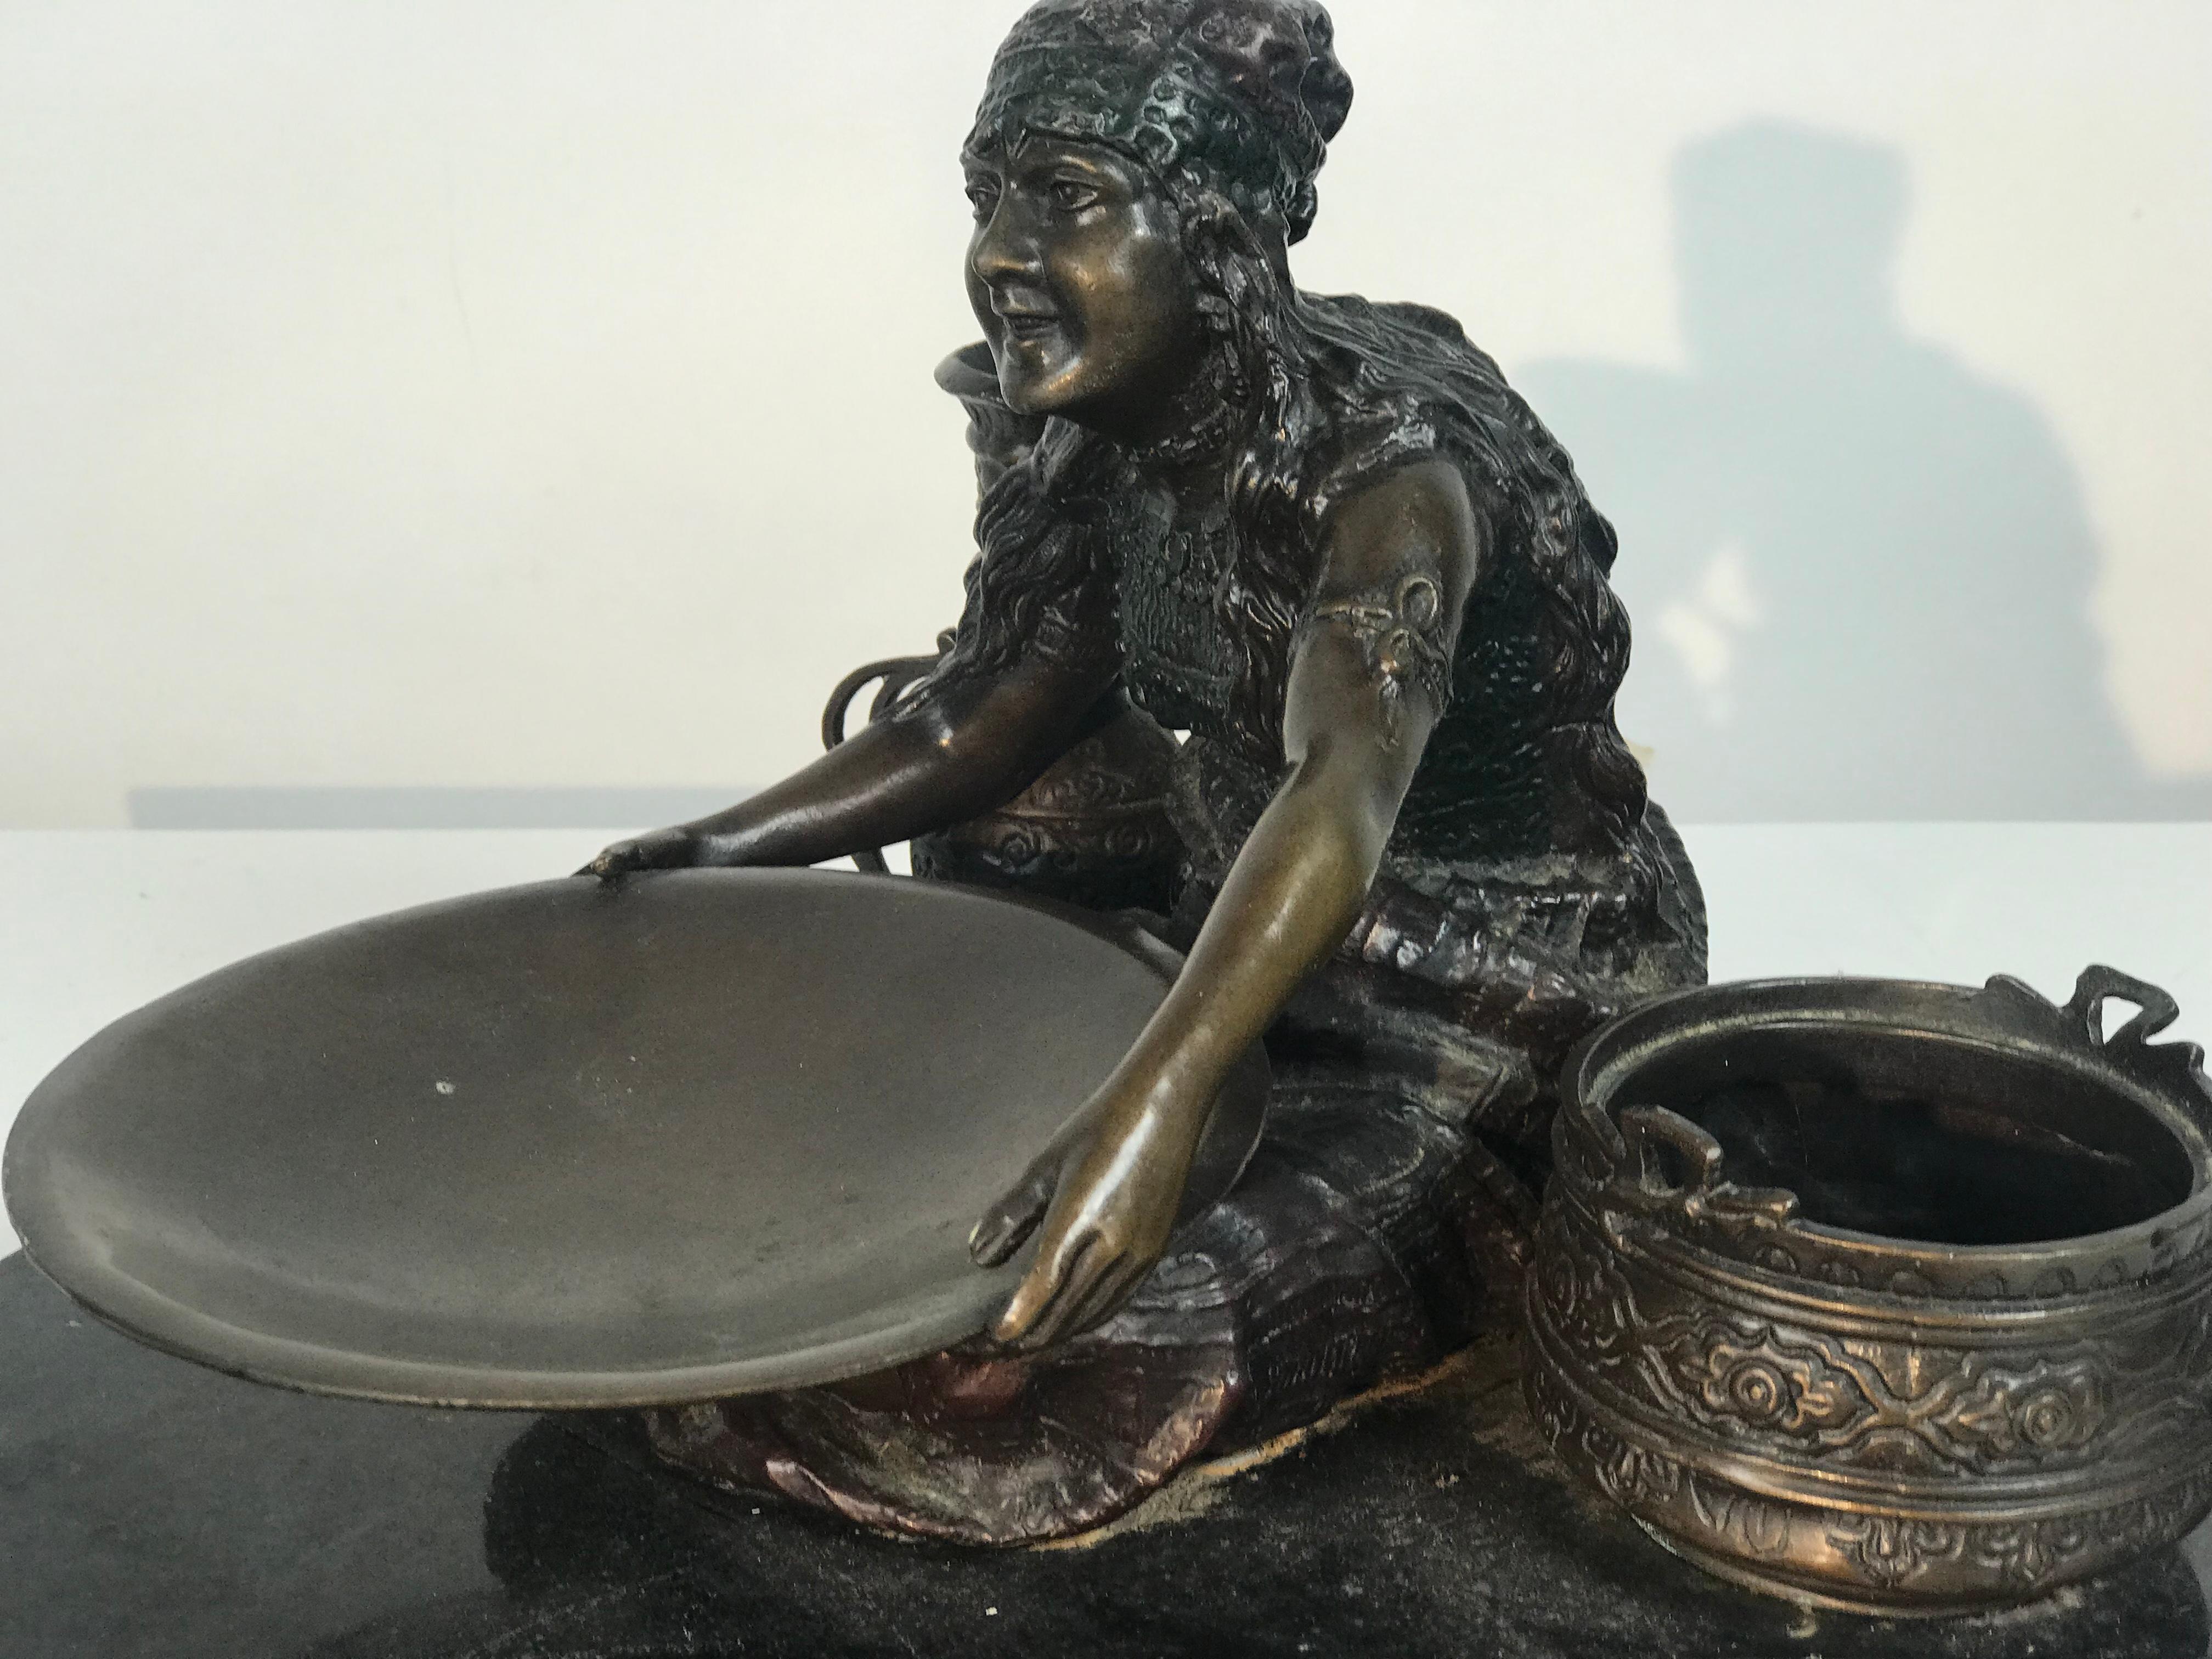 Orientalist Vienna bronze sculpture by Franz Xaver Bergmann (Nam Greb) ,, Stunning depiction of woman with serving dish, exquisite detailing .Wonderful warm bronze patina,, Signed and monogrammed. Sculpture mounted on marble base.